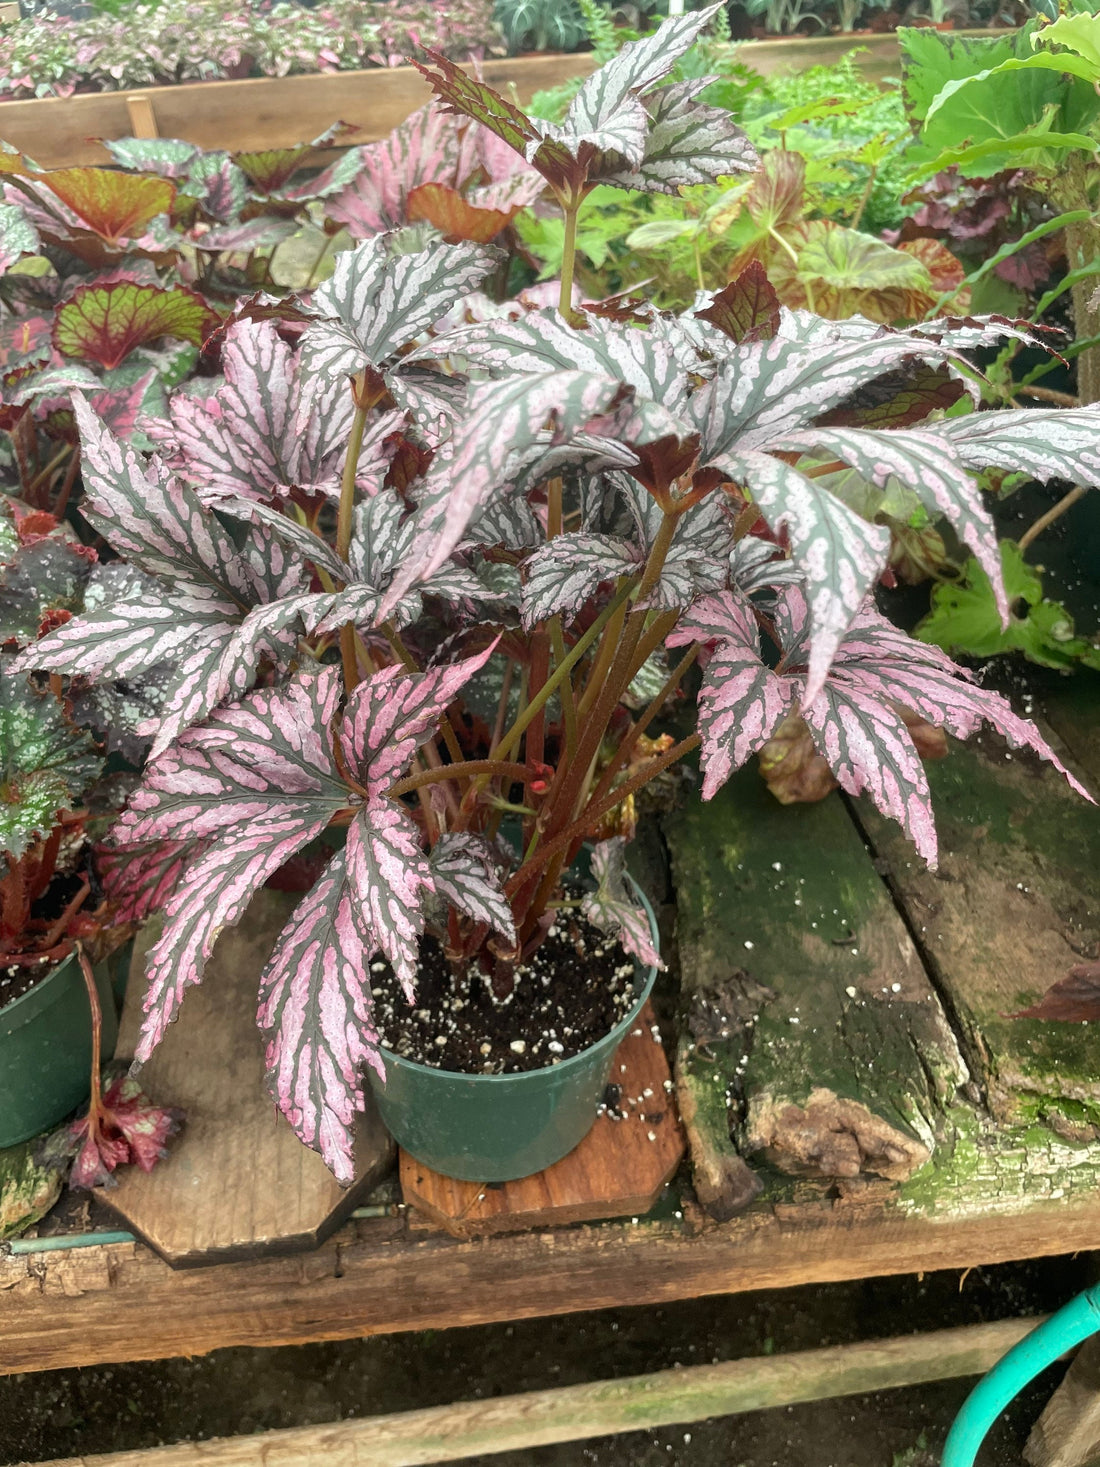 XLarge-1ft tall 6 inch potted live plant -Begonia ‘Benitochiba’-award winning -hard to find this size - mature leaves - Palm like